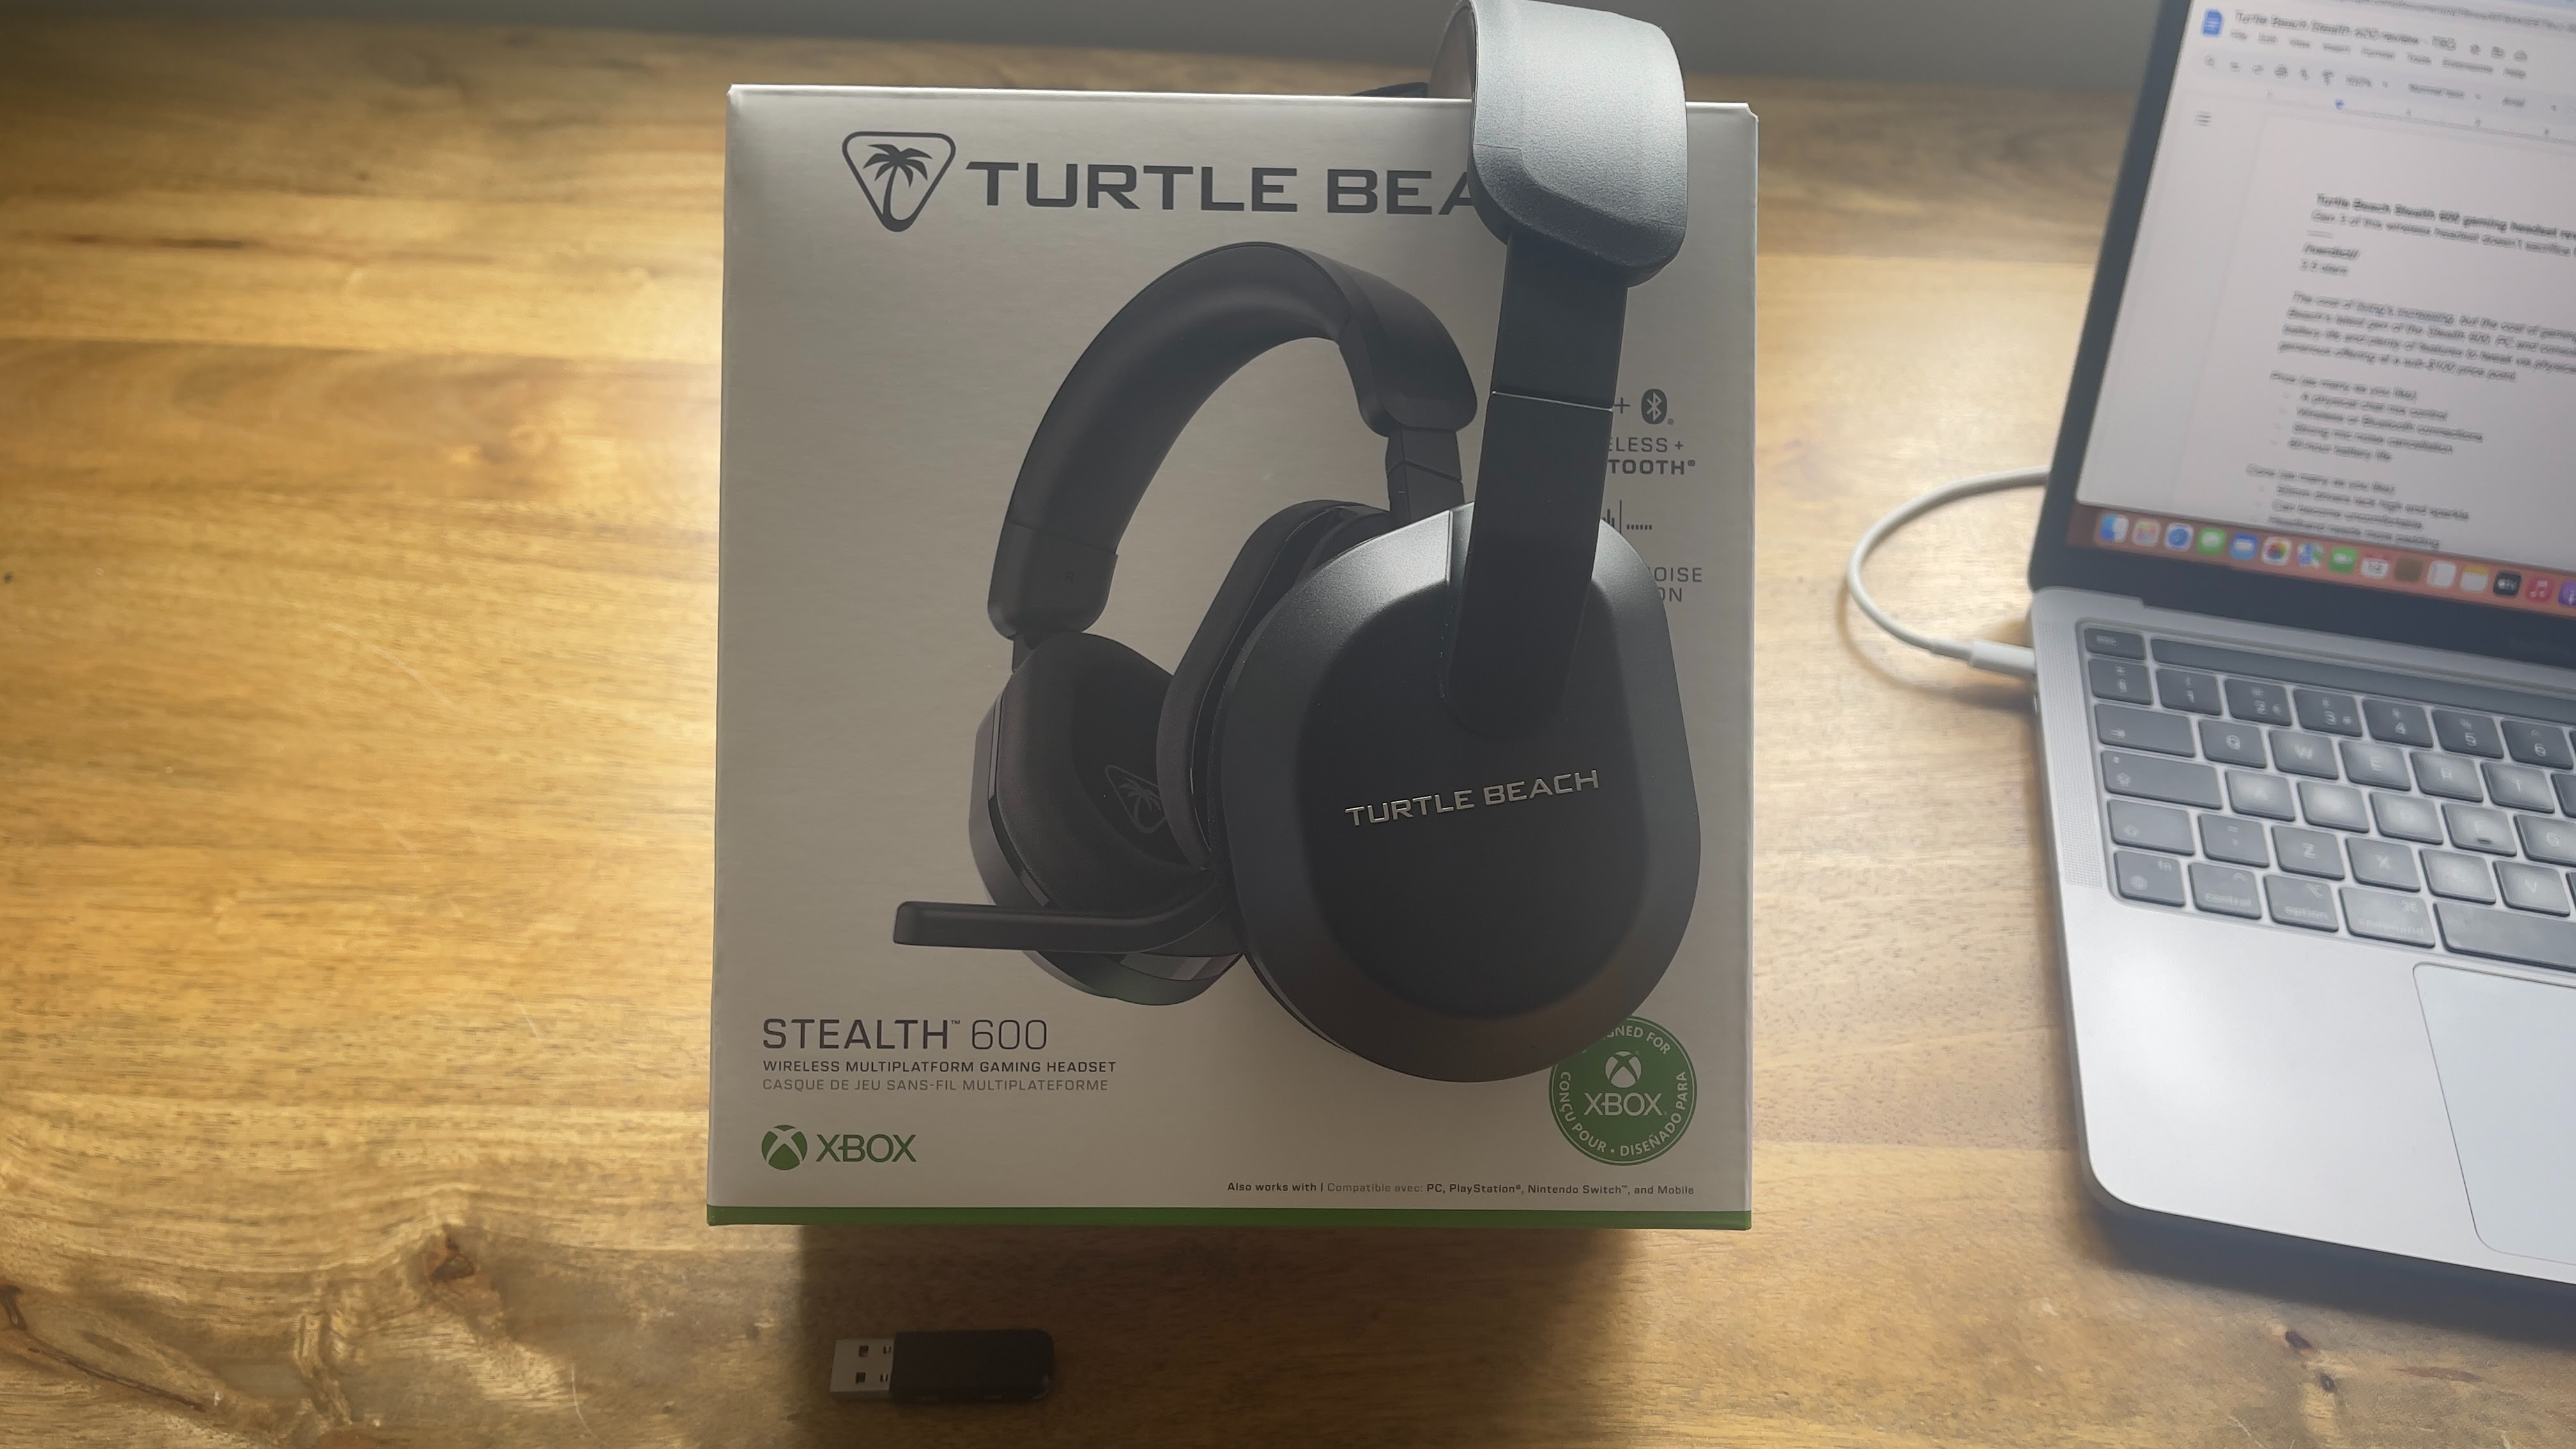 Turtle Beach Stealth 600 Gen 3 review: all about value